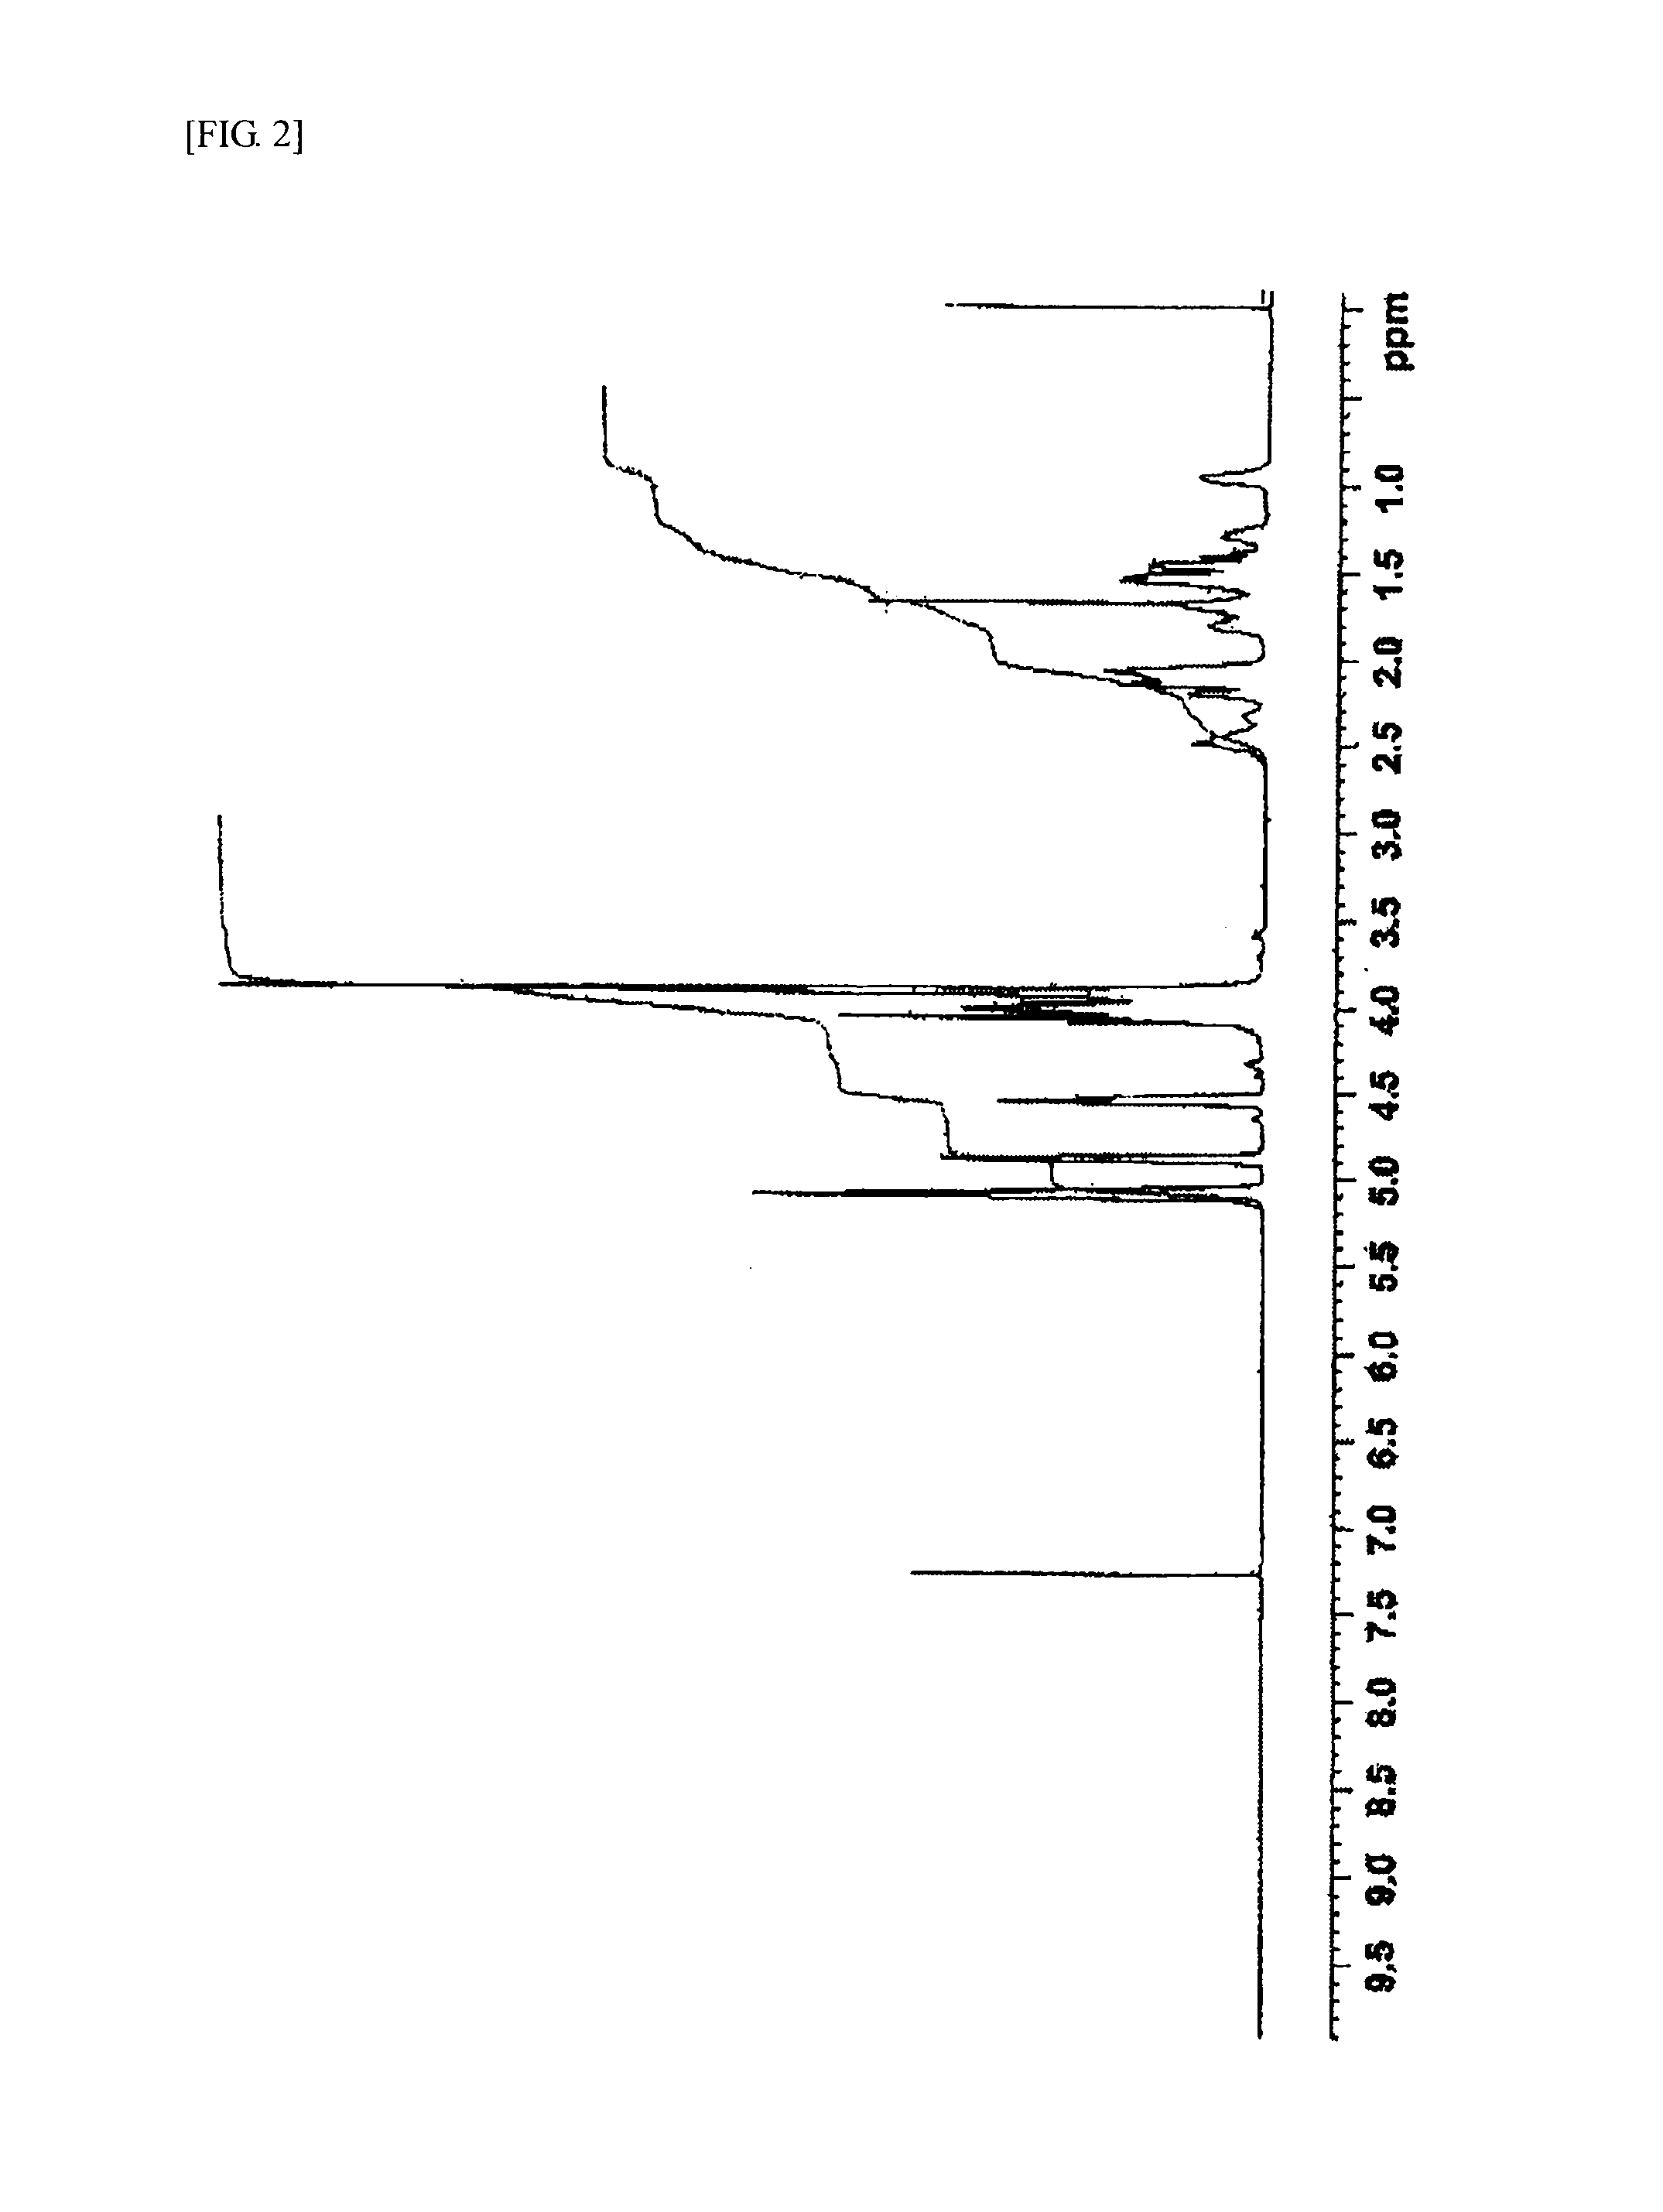 Processes for producing polycarbonate and molded polycarbonate articles